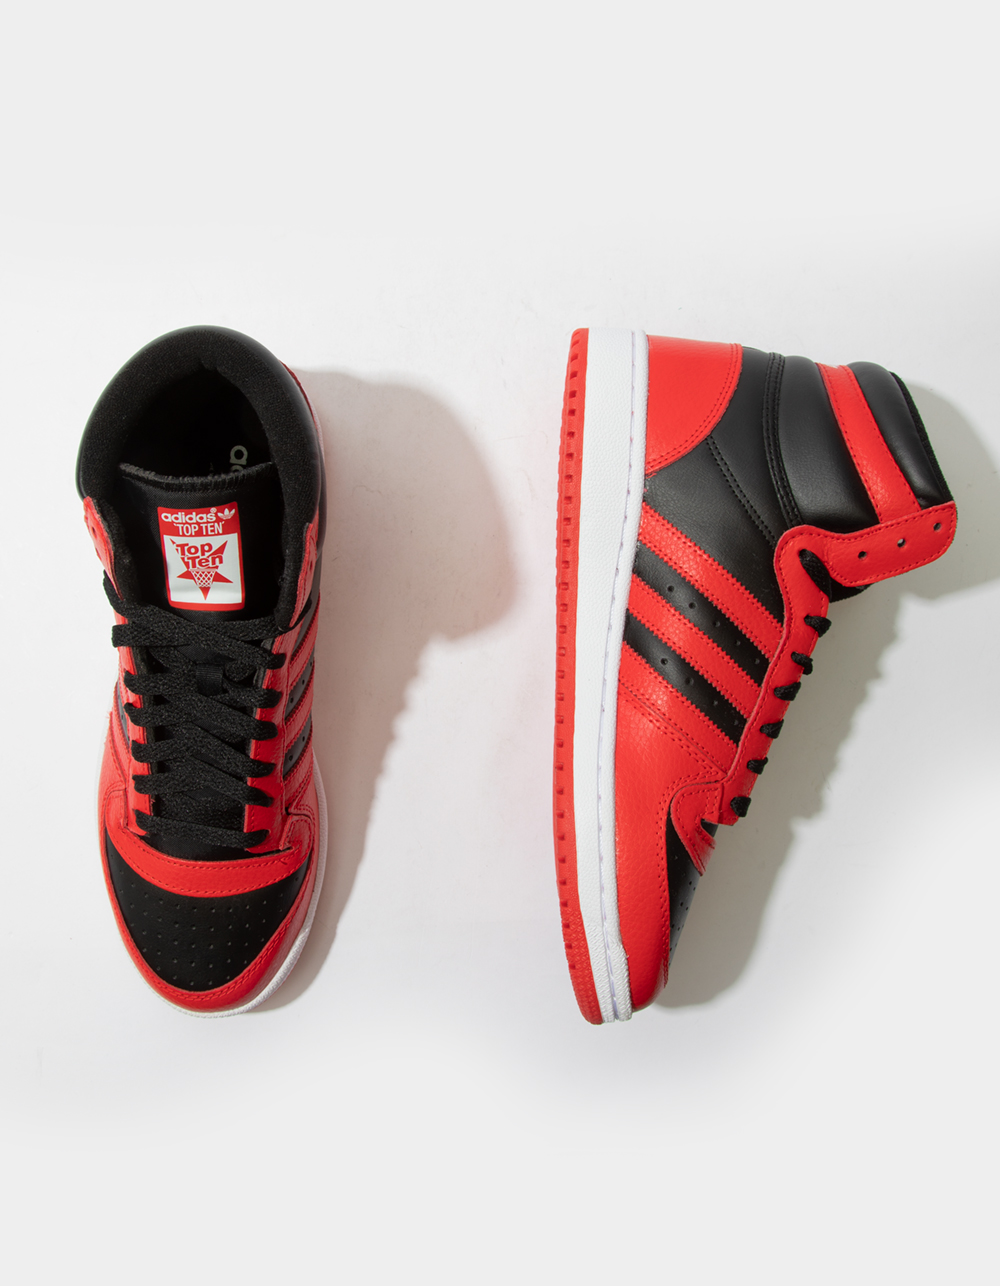 ADIDAS Top Ten RB Shoes - RED COMBO | Tillys